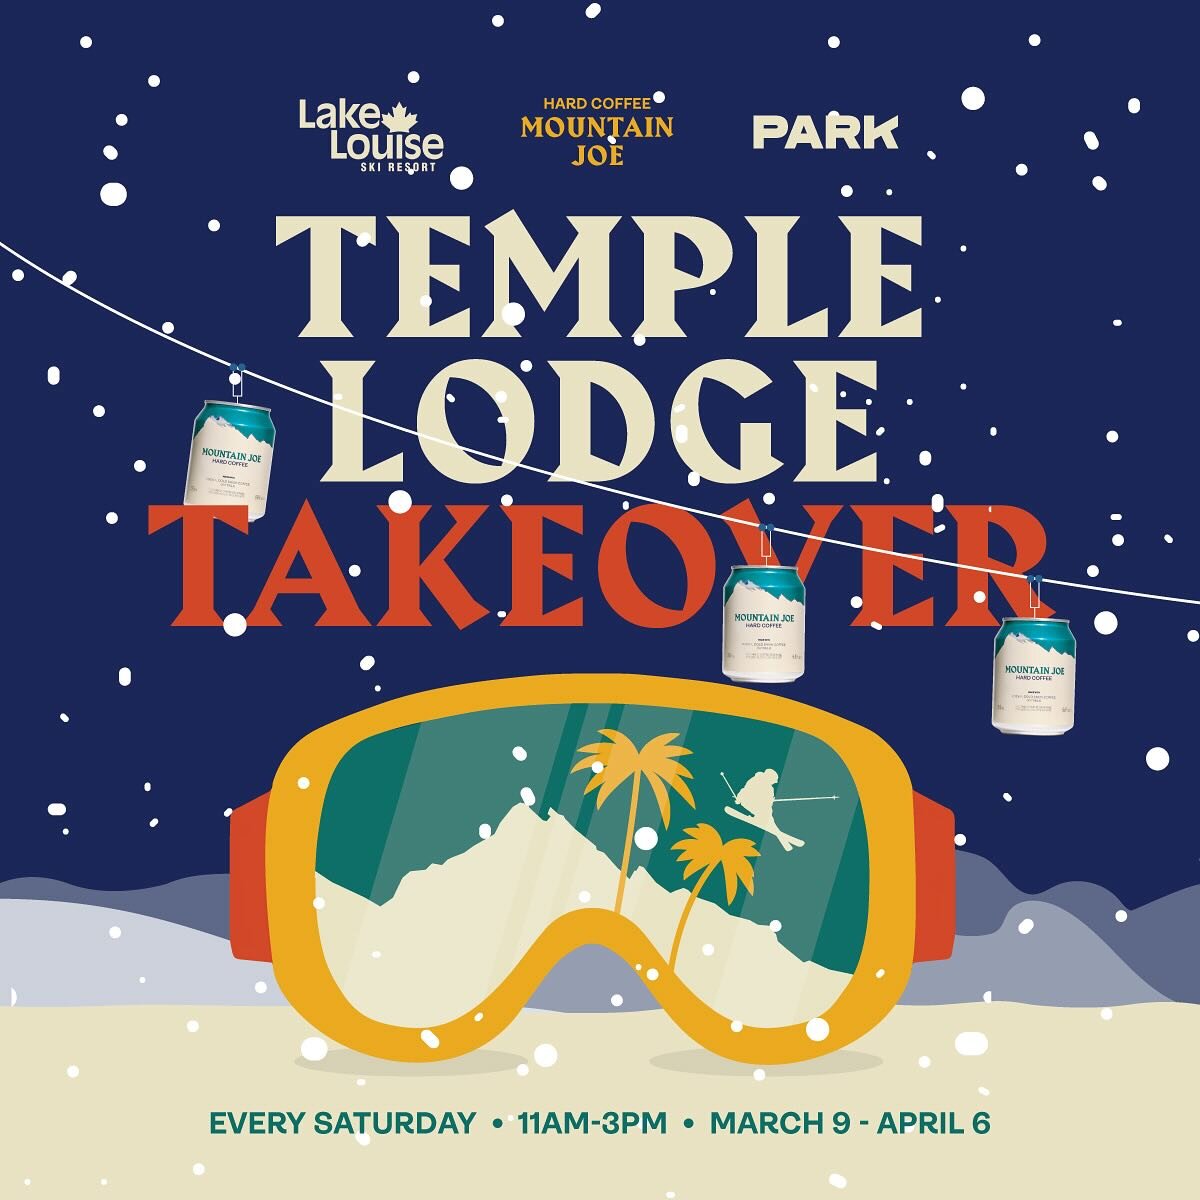 Calling all winter fun enthusiasts, it&rsquo;s Temple Lodge Takeover time @skilouise. ⛷️🏂🏻⁠
⁠
Join us Saturday&rsquo;s on the backside of the Lake Louise Ski Resort at Temple Lodge from 11:00am - 3:00pm. It&rsquo;s definitely the place to crush som